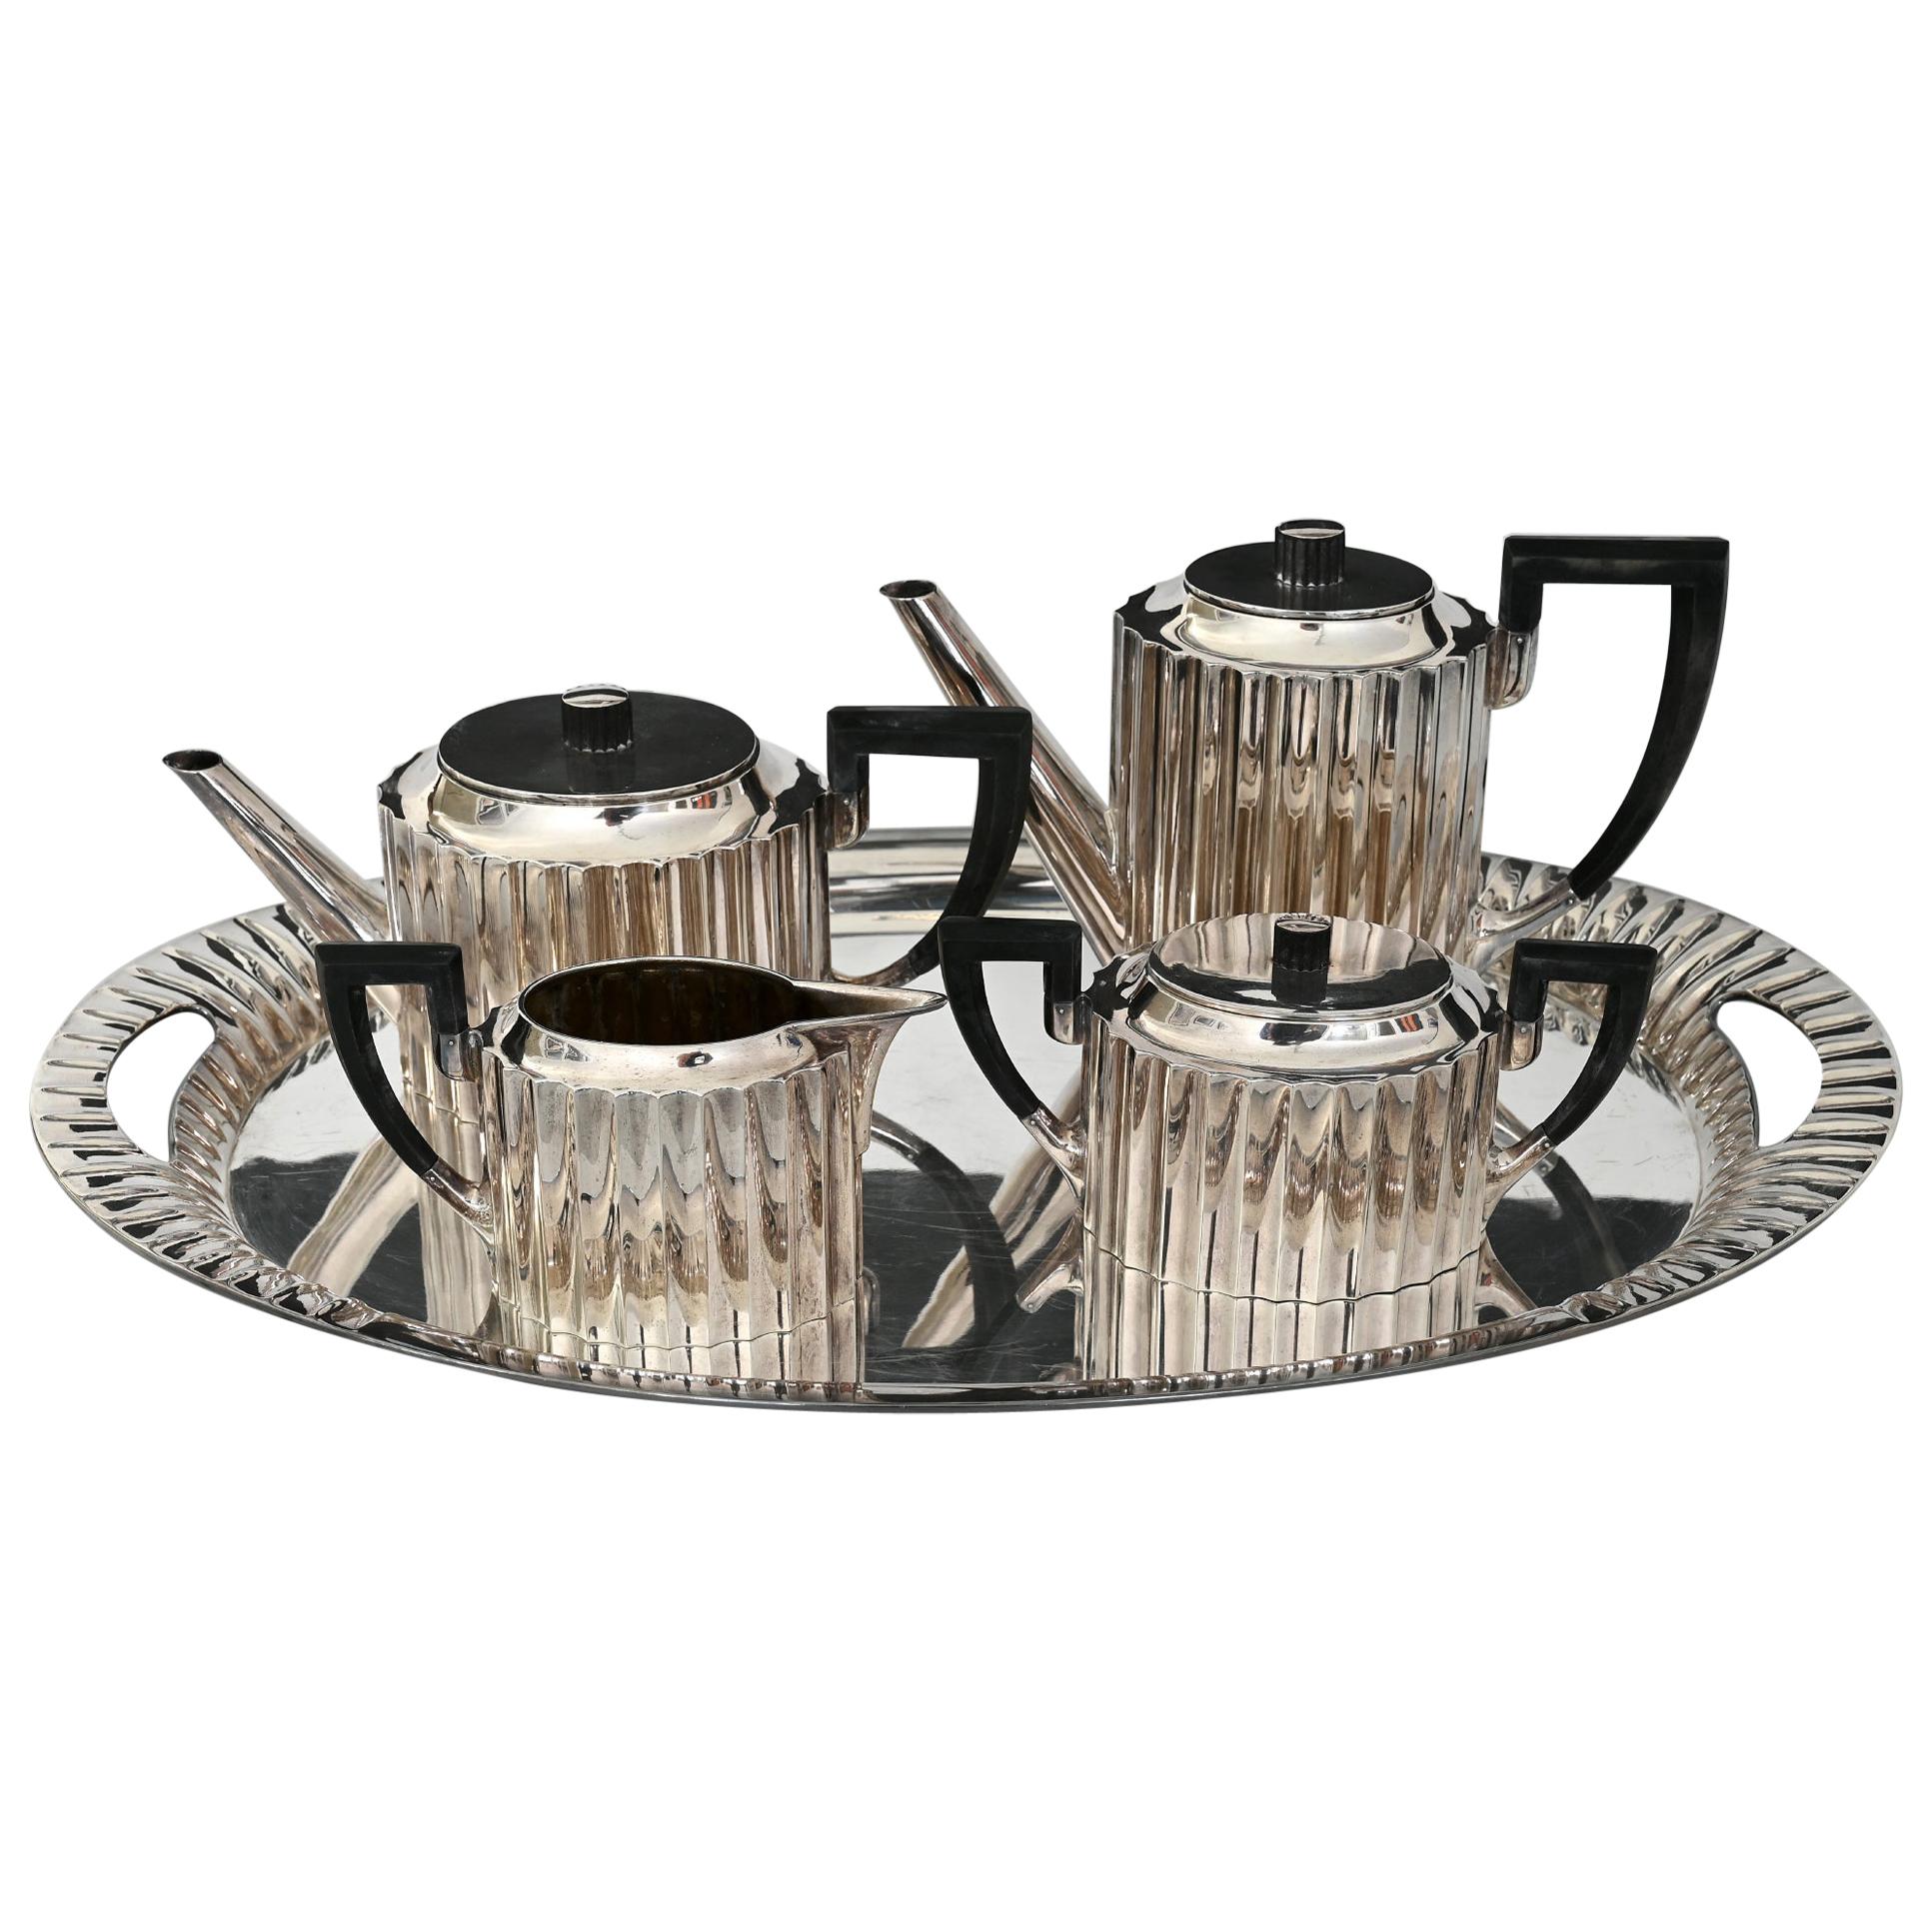 Art Deco Silver Tea and Coffee Set with Tray 5 Pieces, Silver 4.2 Kg